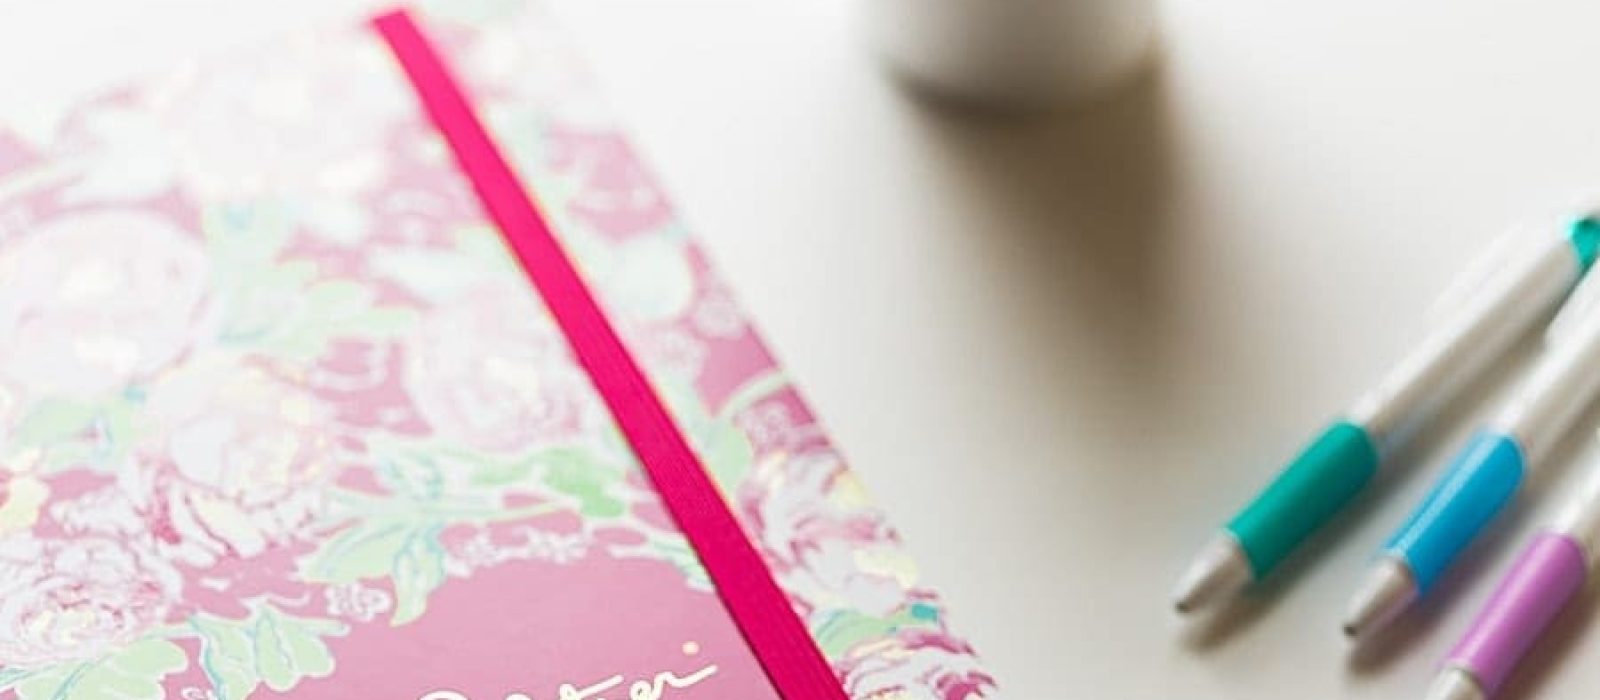 Pink lilly pulitzer high school agenda with pens and coffee cup